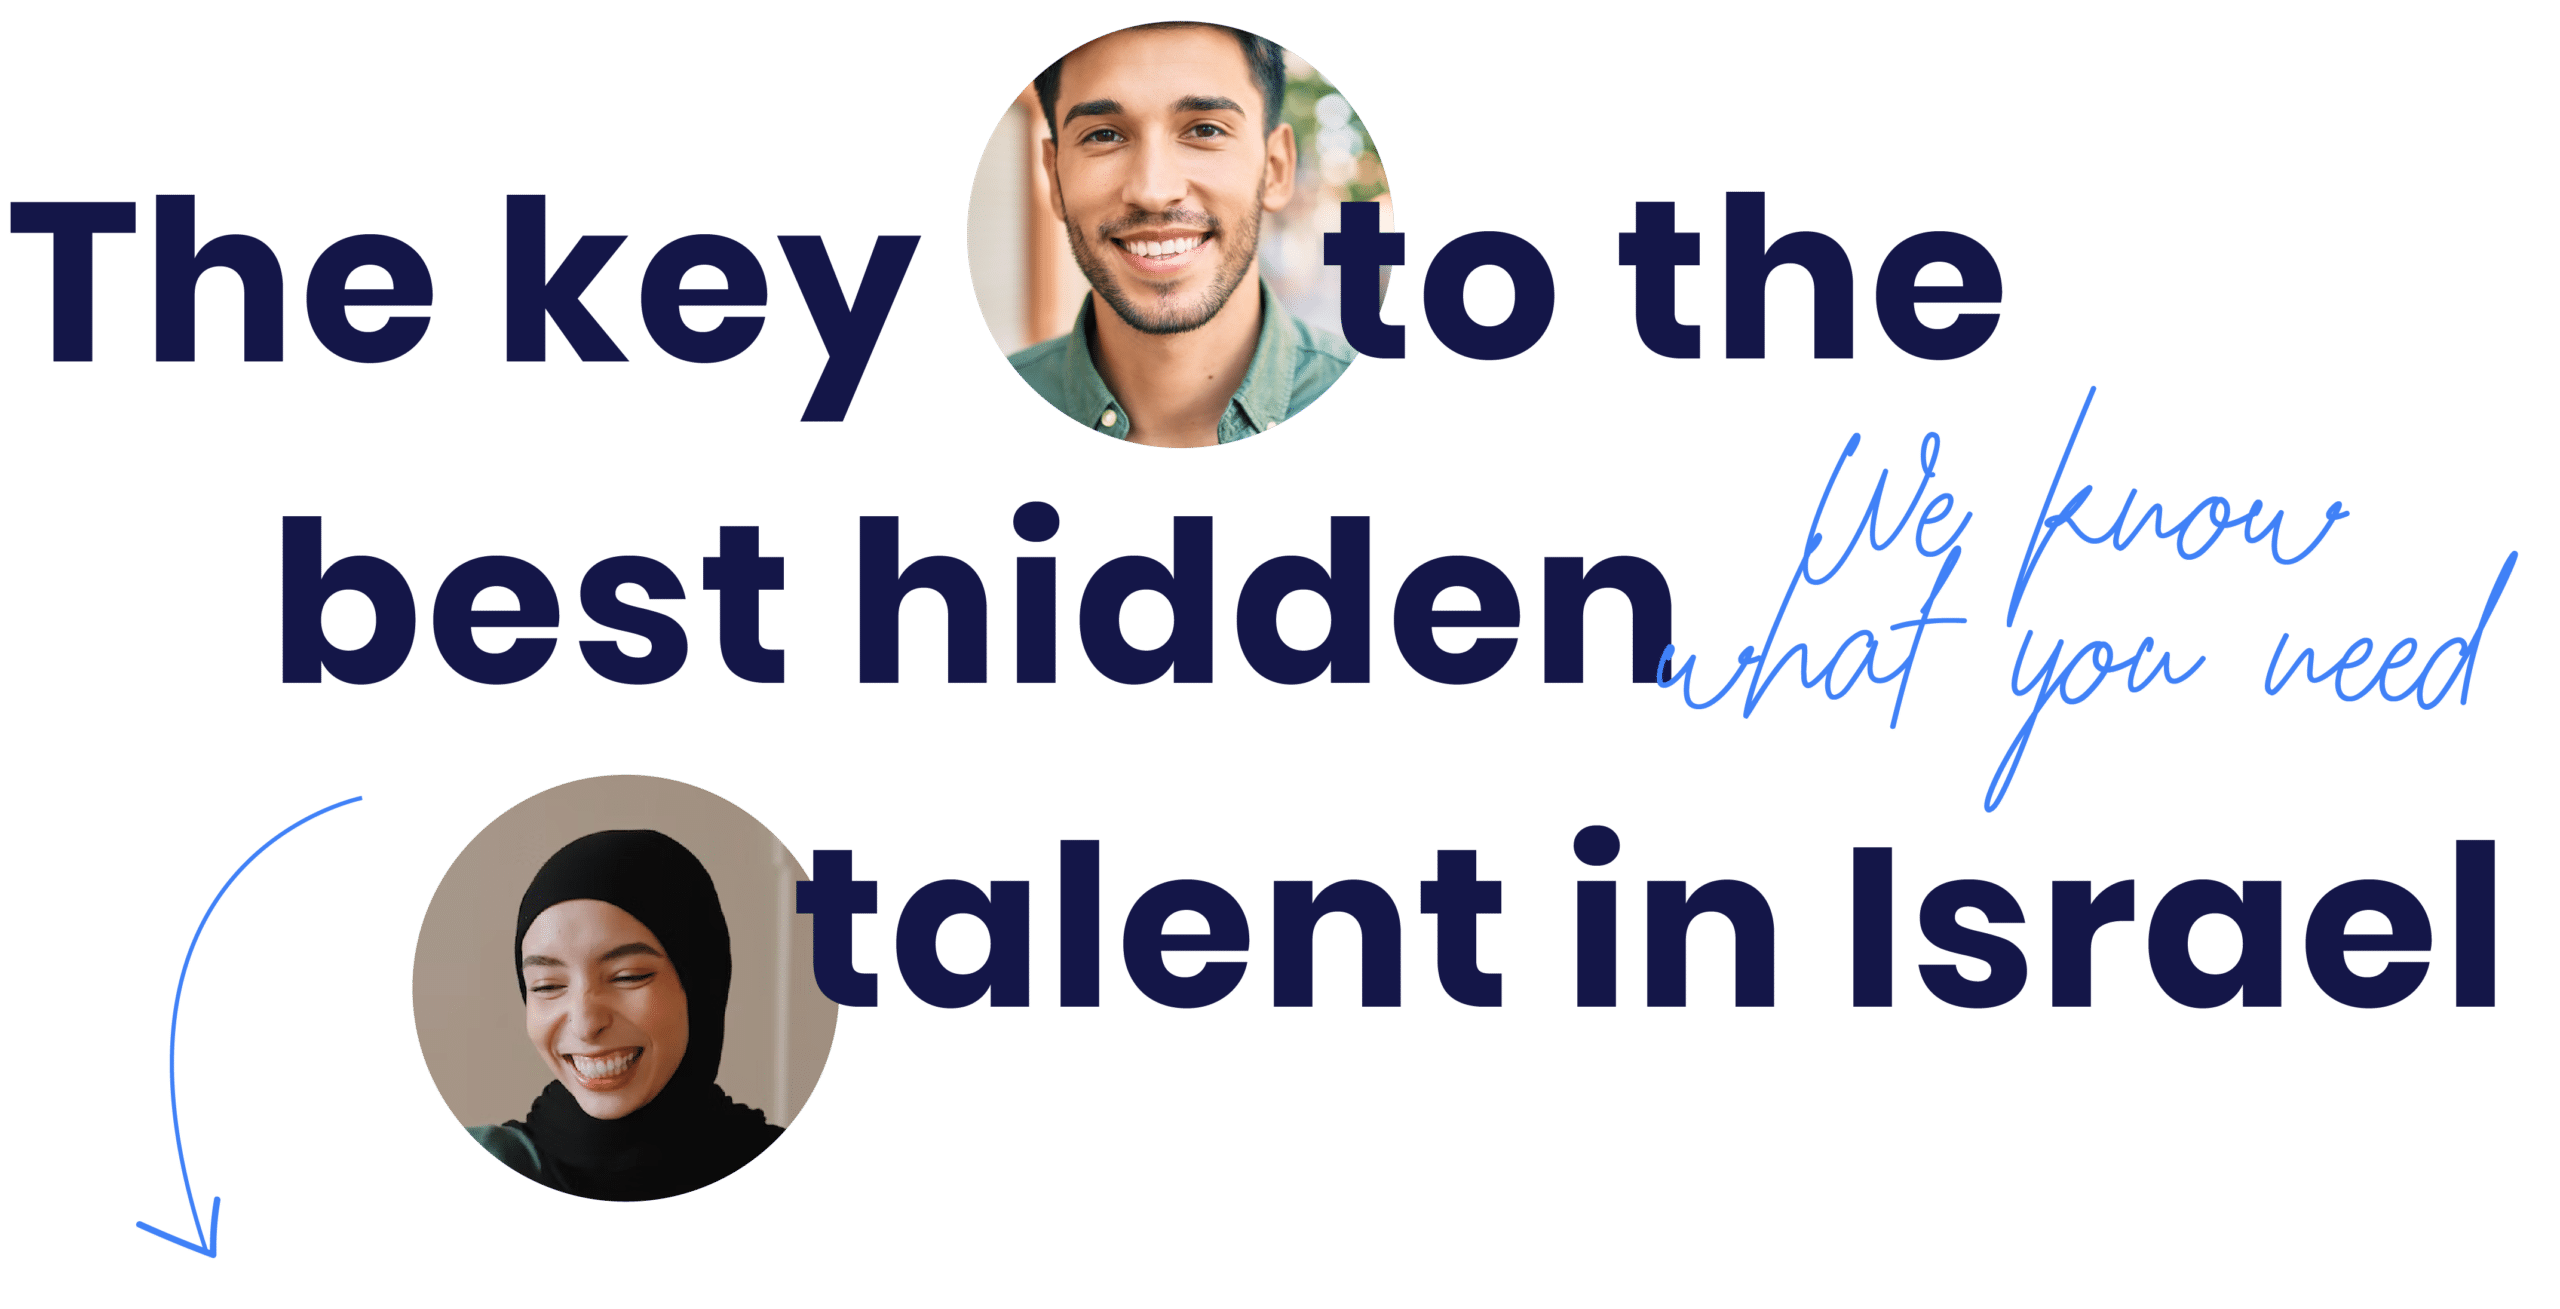 The key to the best hidden talent in israel